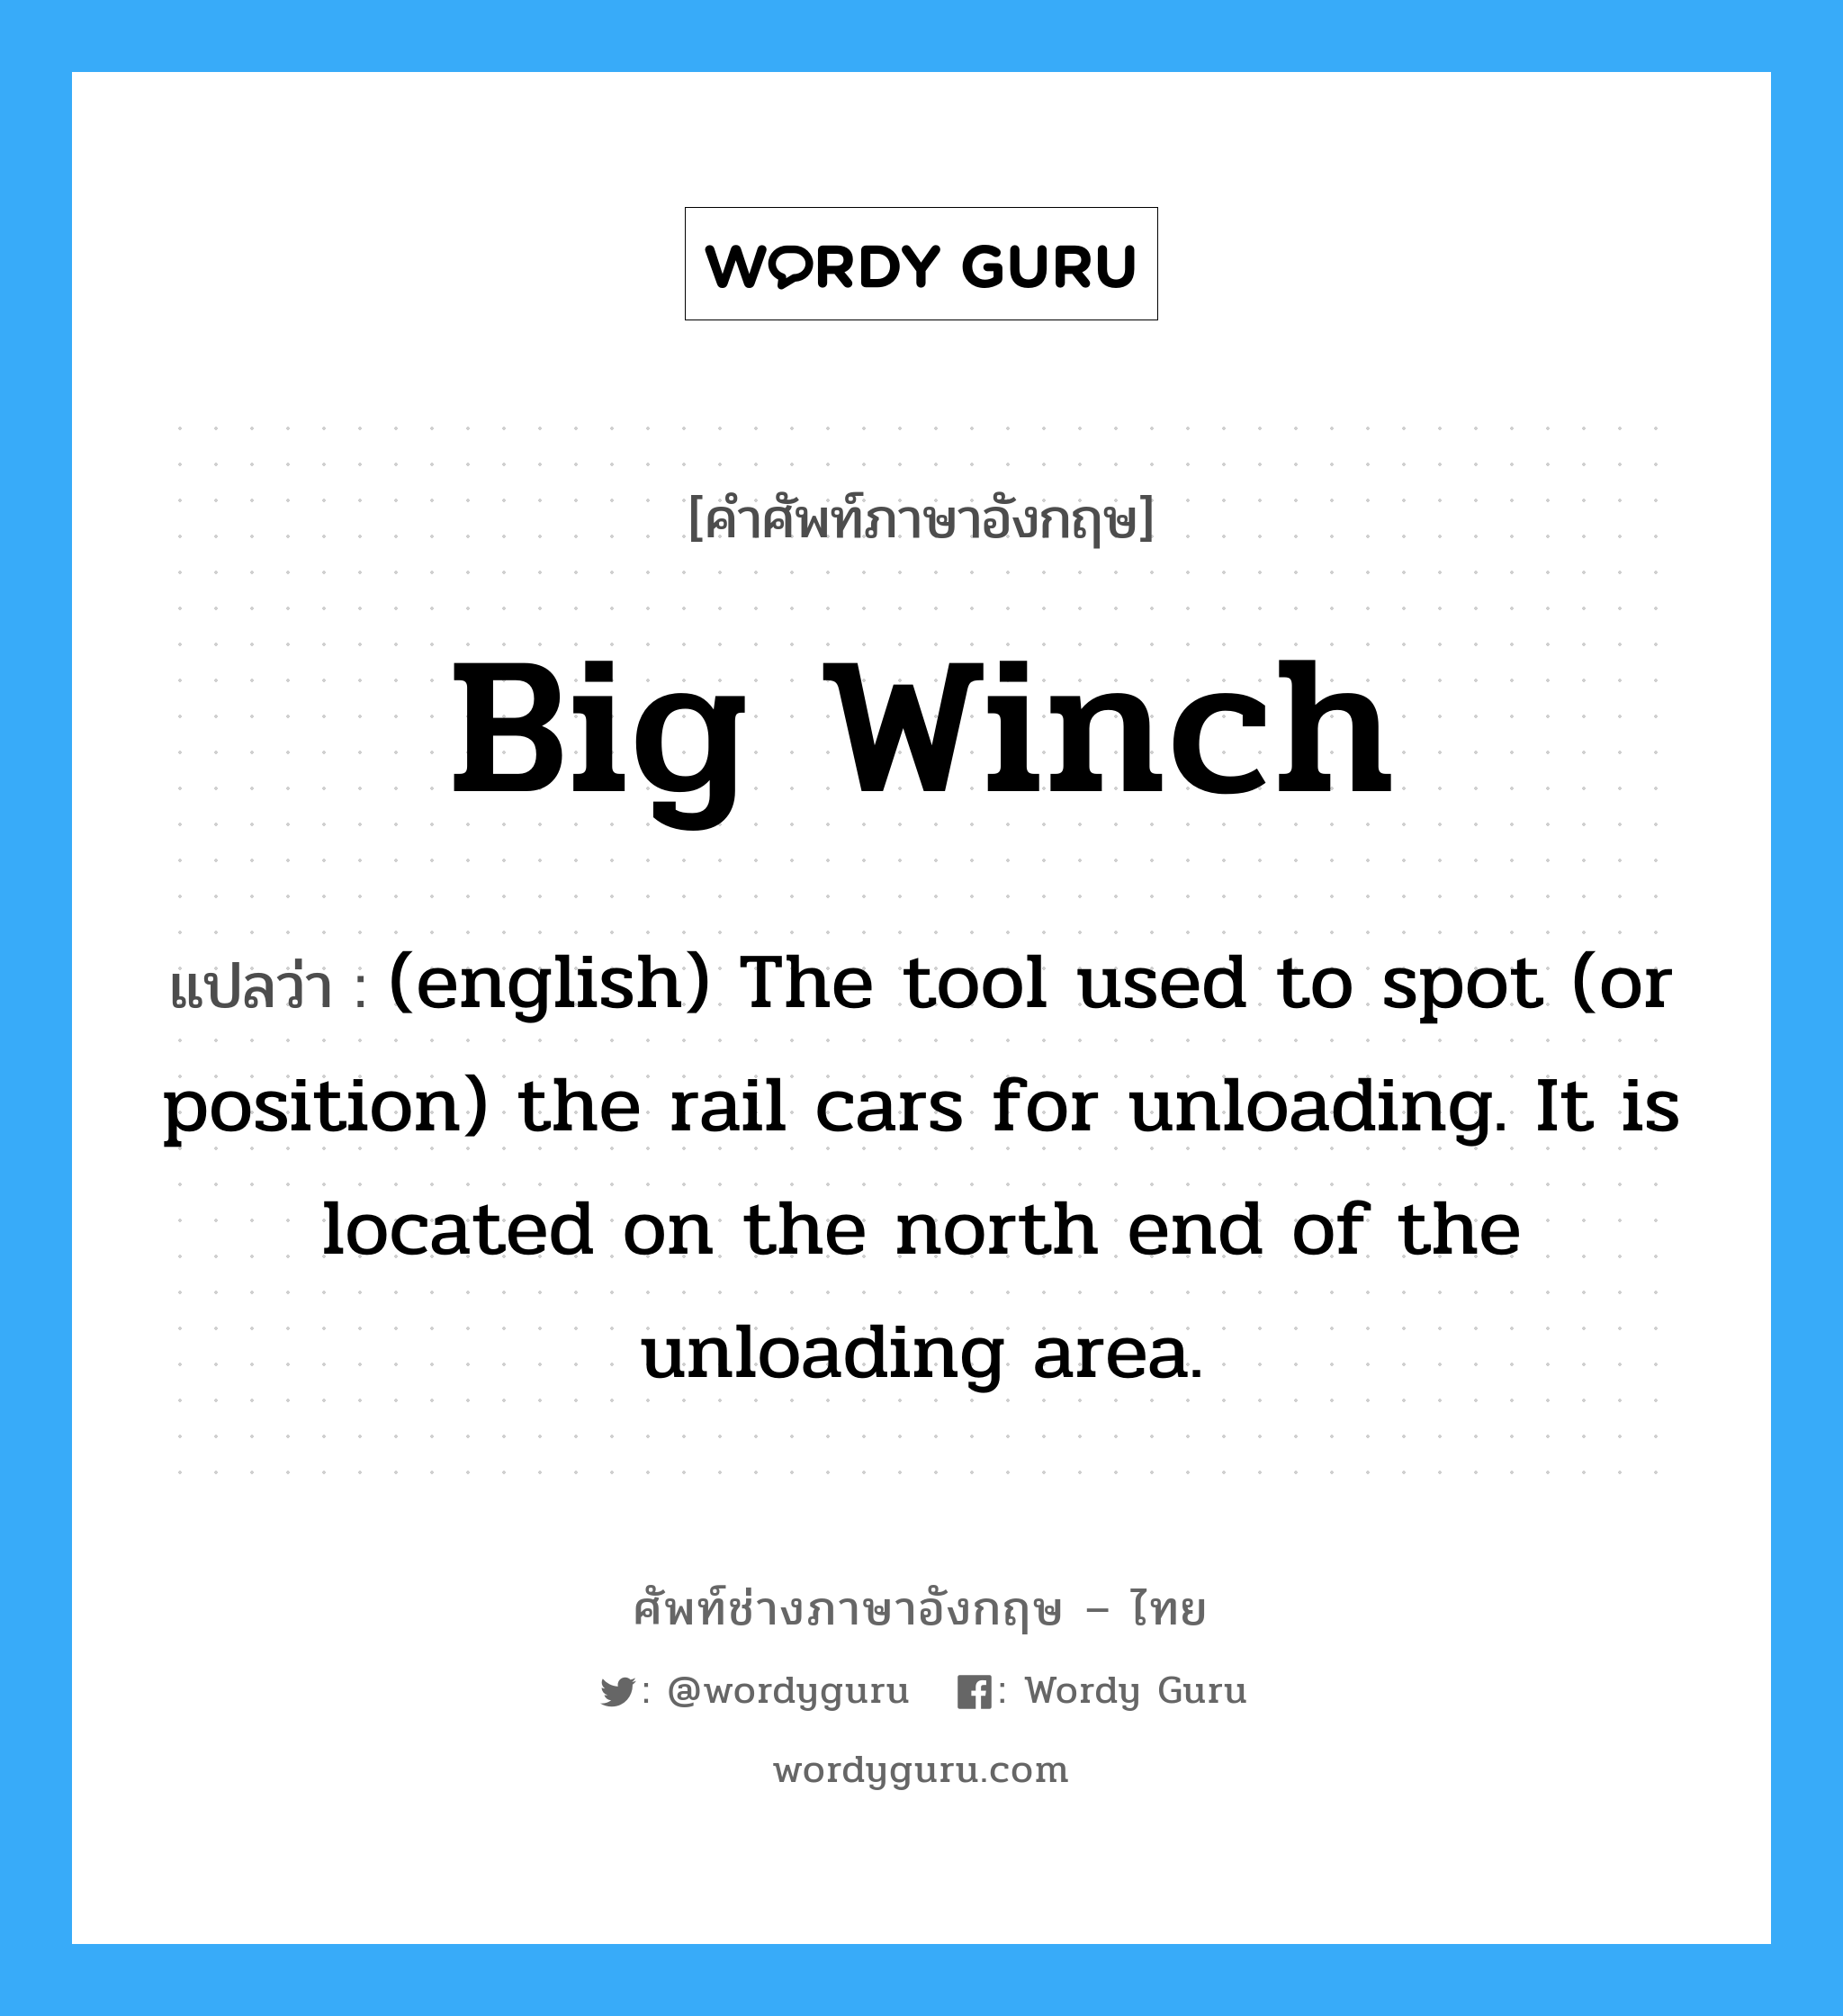 Big Winch แปลว่า?, คำศัพท์ช่างภาษาอังกฤษ - ไทย Big Winch คำศัพท์ภาษาอังกฤษ Big Winch แปลว่า (english) The tool used to spot (or position) the rail cars for unloading. It is located on the north end of the unloading area.